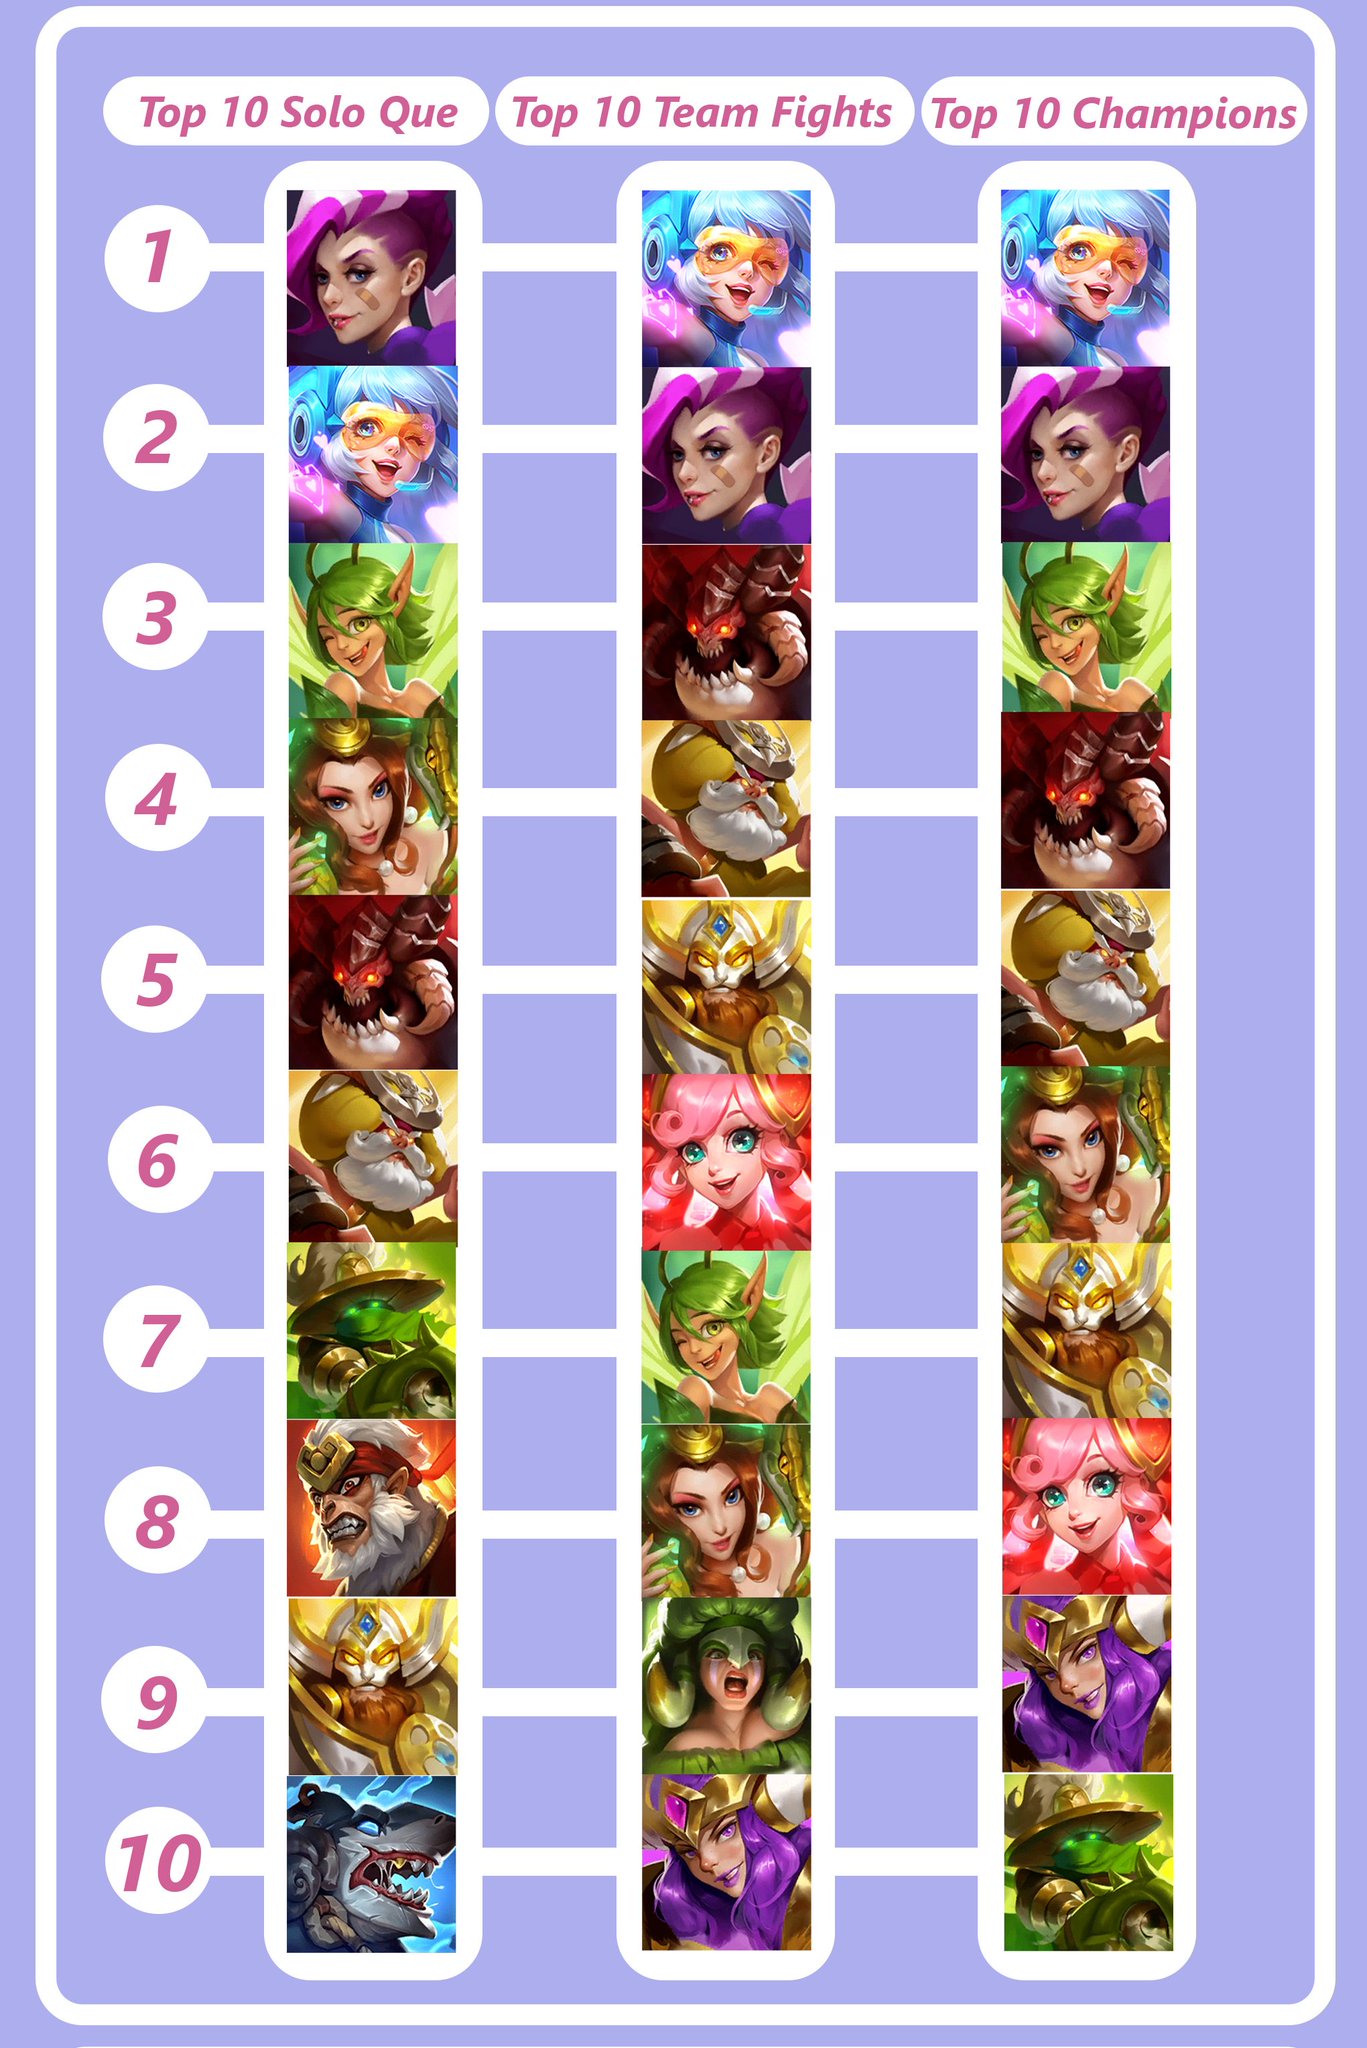 Rådgiver efter det Væk Dungeon Hunter Champions on Twitter: "This 5v5 ⚔️ Champion Tier List, by  LynxKnight3, was posted on the DHC Reddit page &amp; created from a  community made poll on our Discord channel! Do